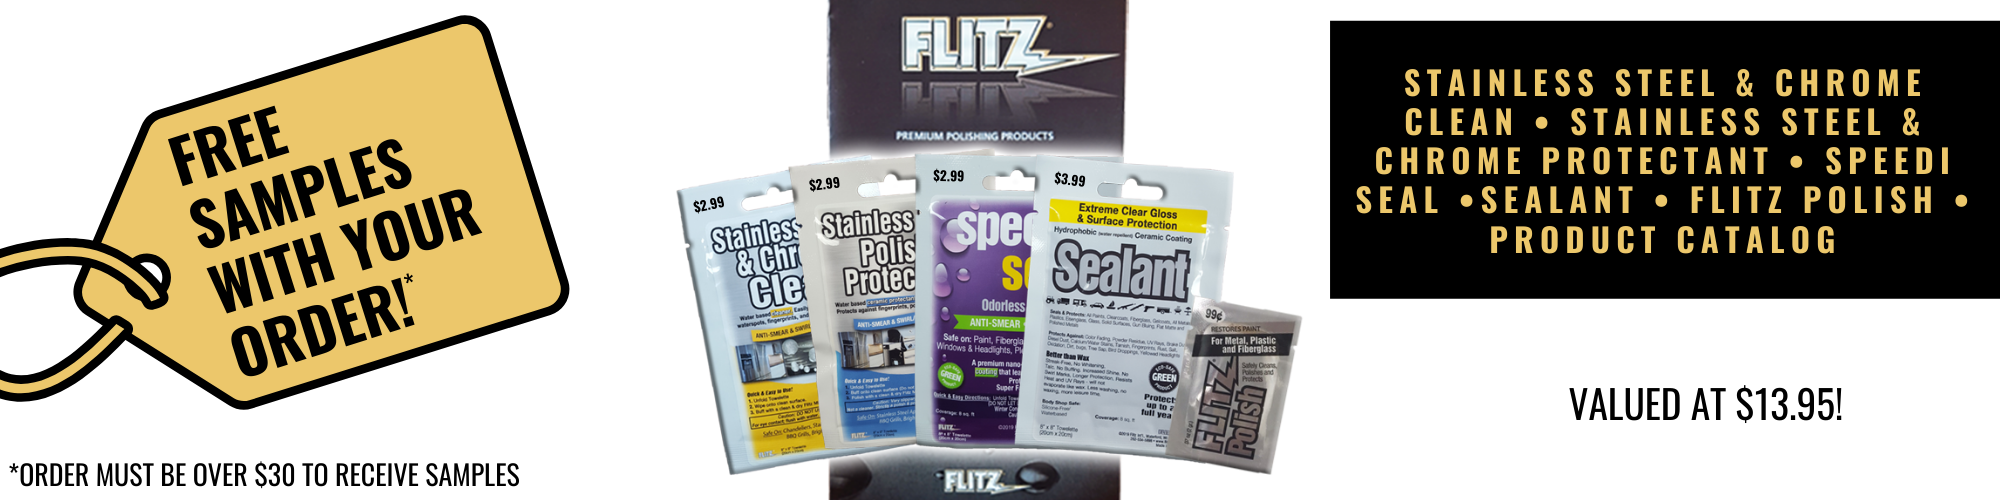 Flitz Premium Polishing Products The Official Website Of Flitz